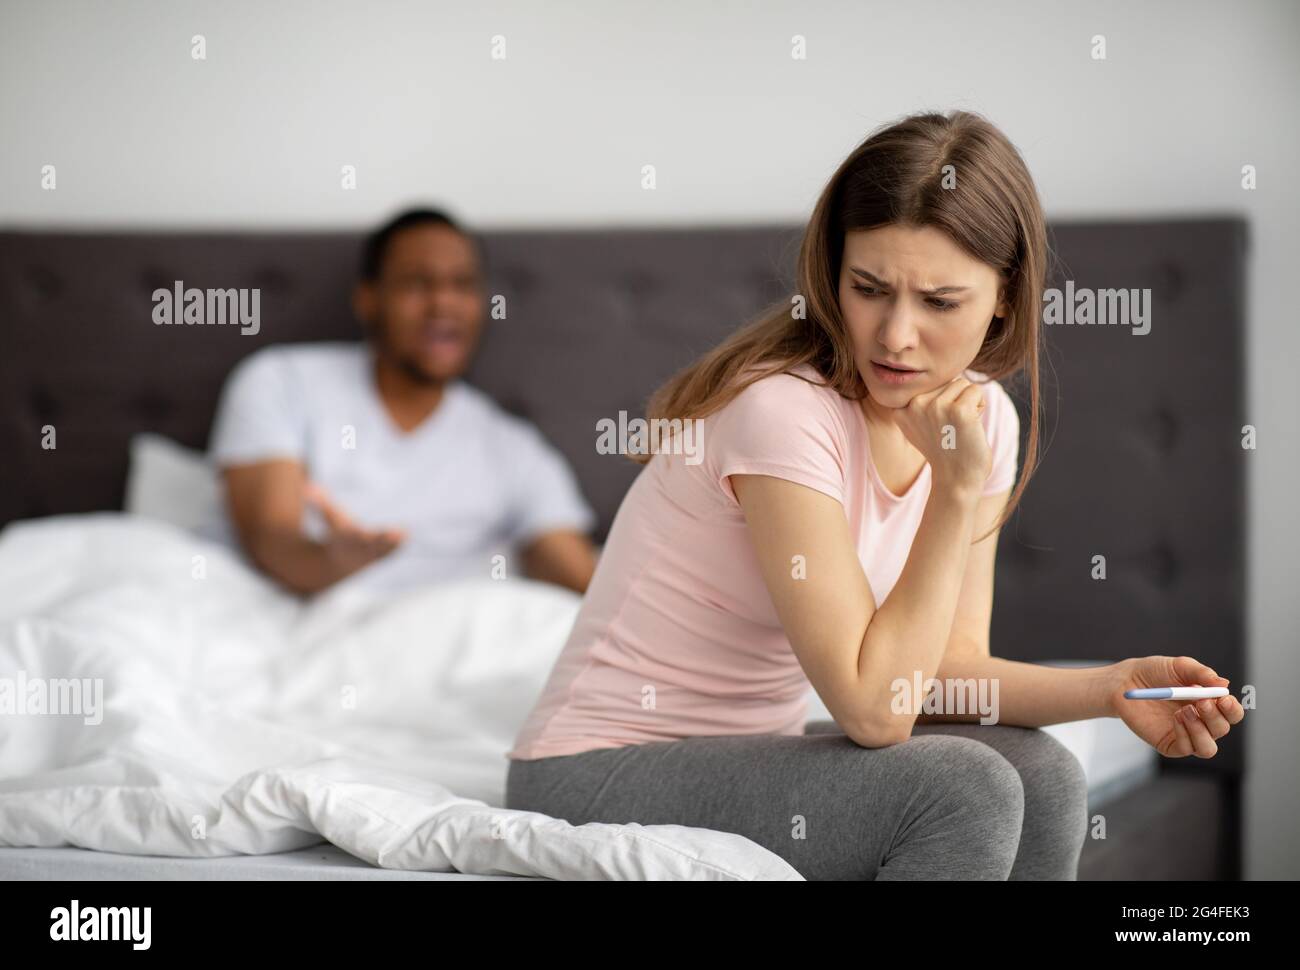 Unhappy young woman sitting on bed with pregnancy test, black husband screaming at her, indoors Stock Photo